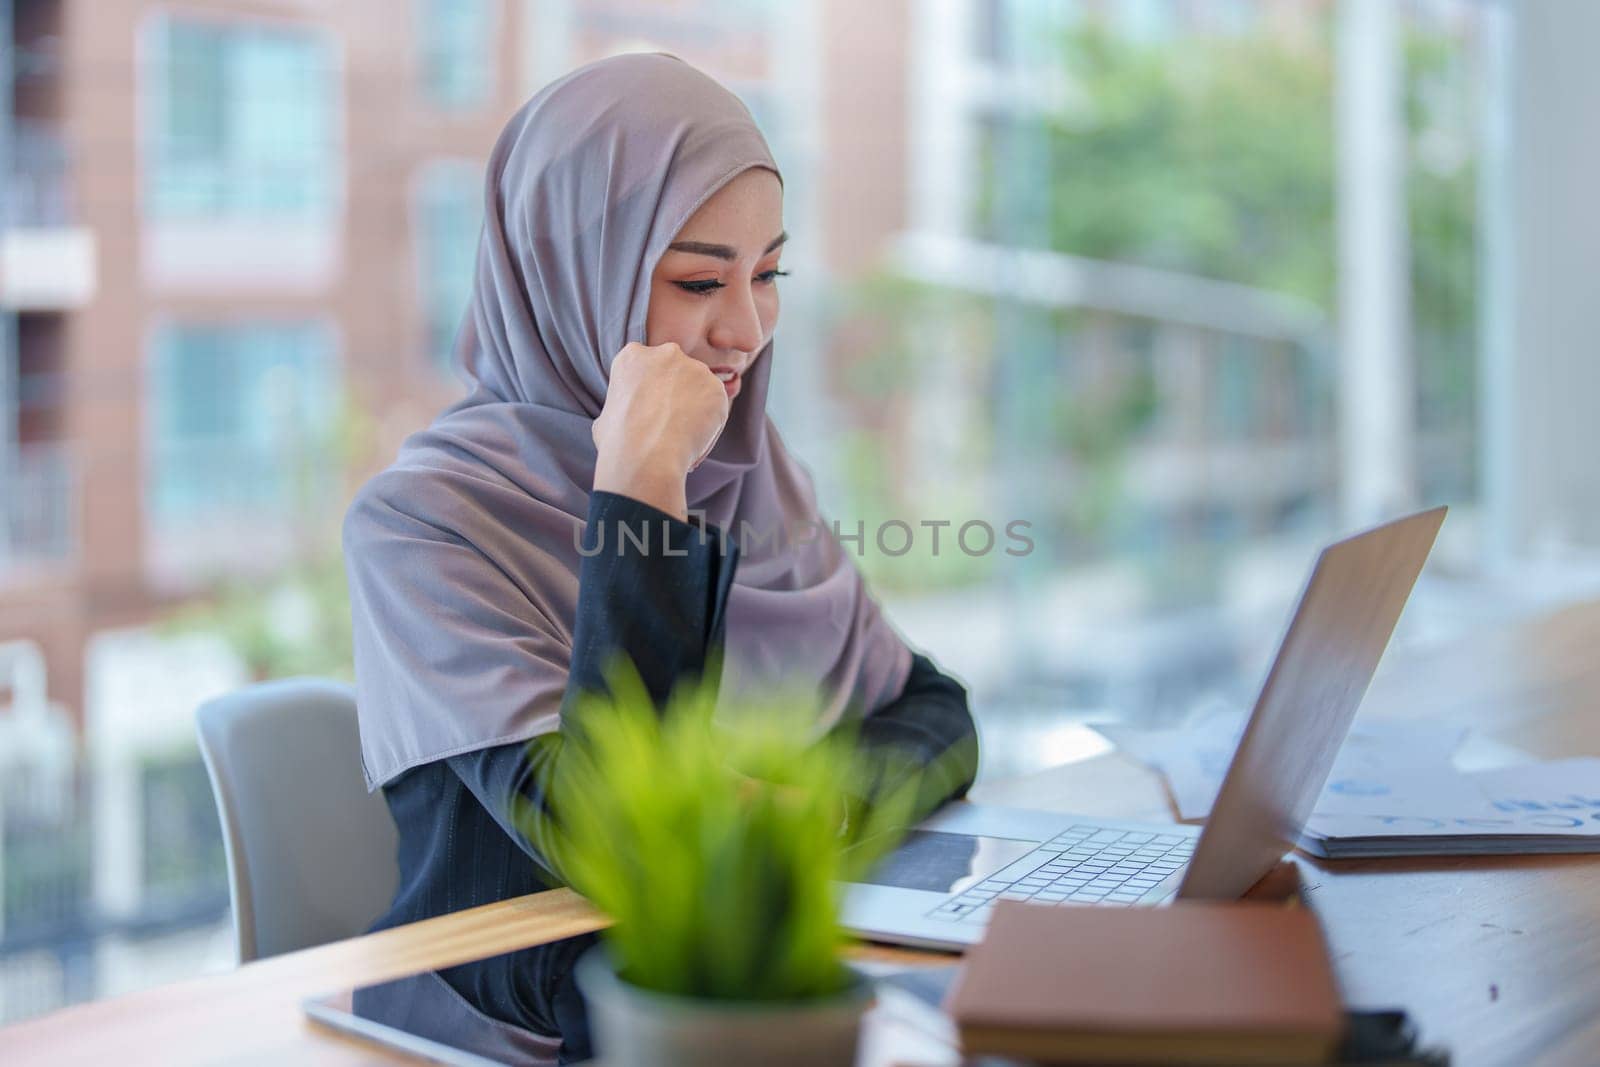 A beautiful Muslim woman showing a smiling face in the morning using computers and documents working at the office.